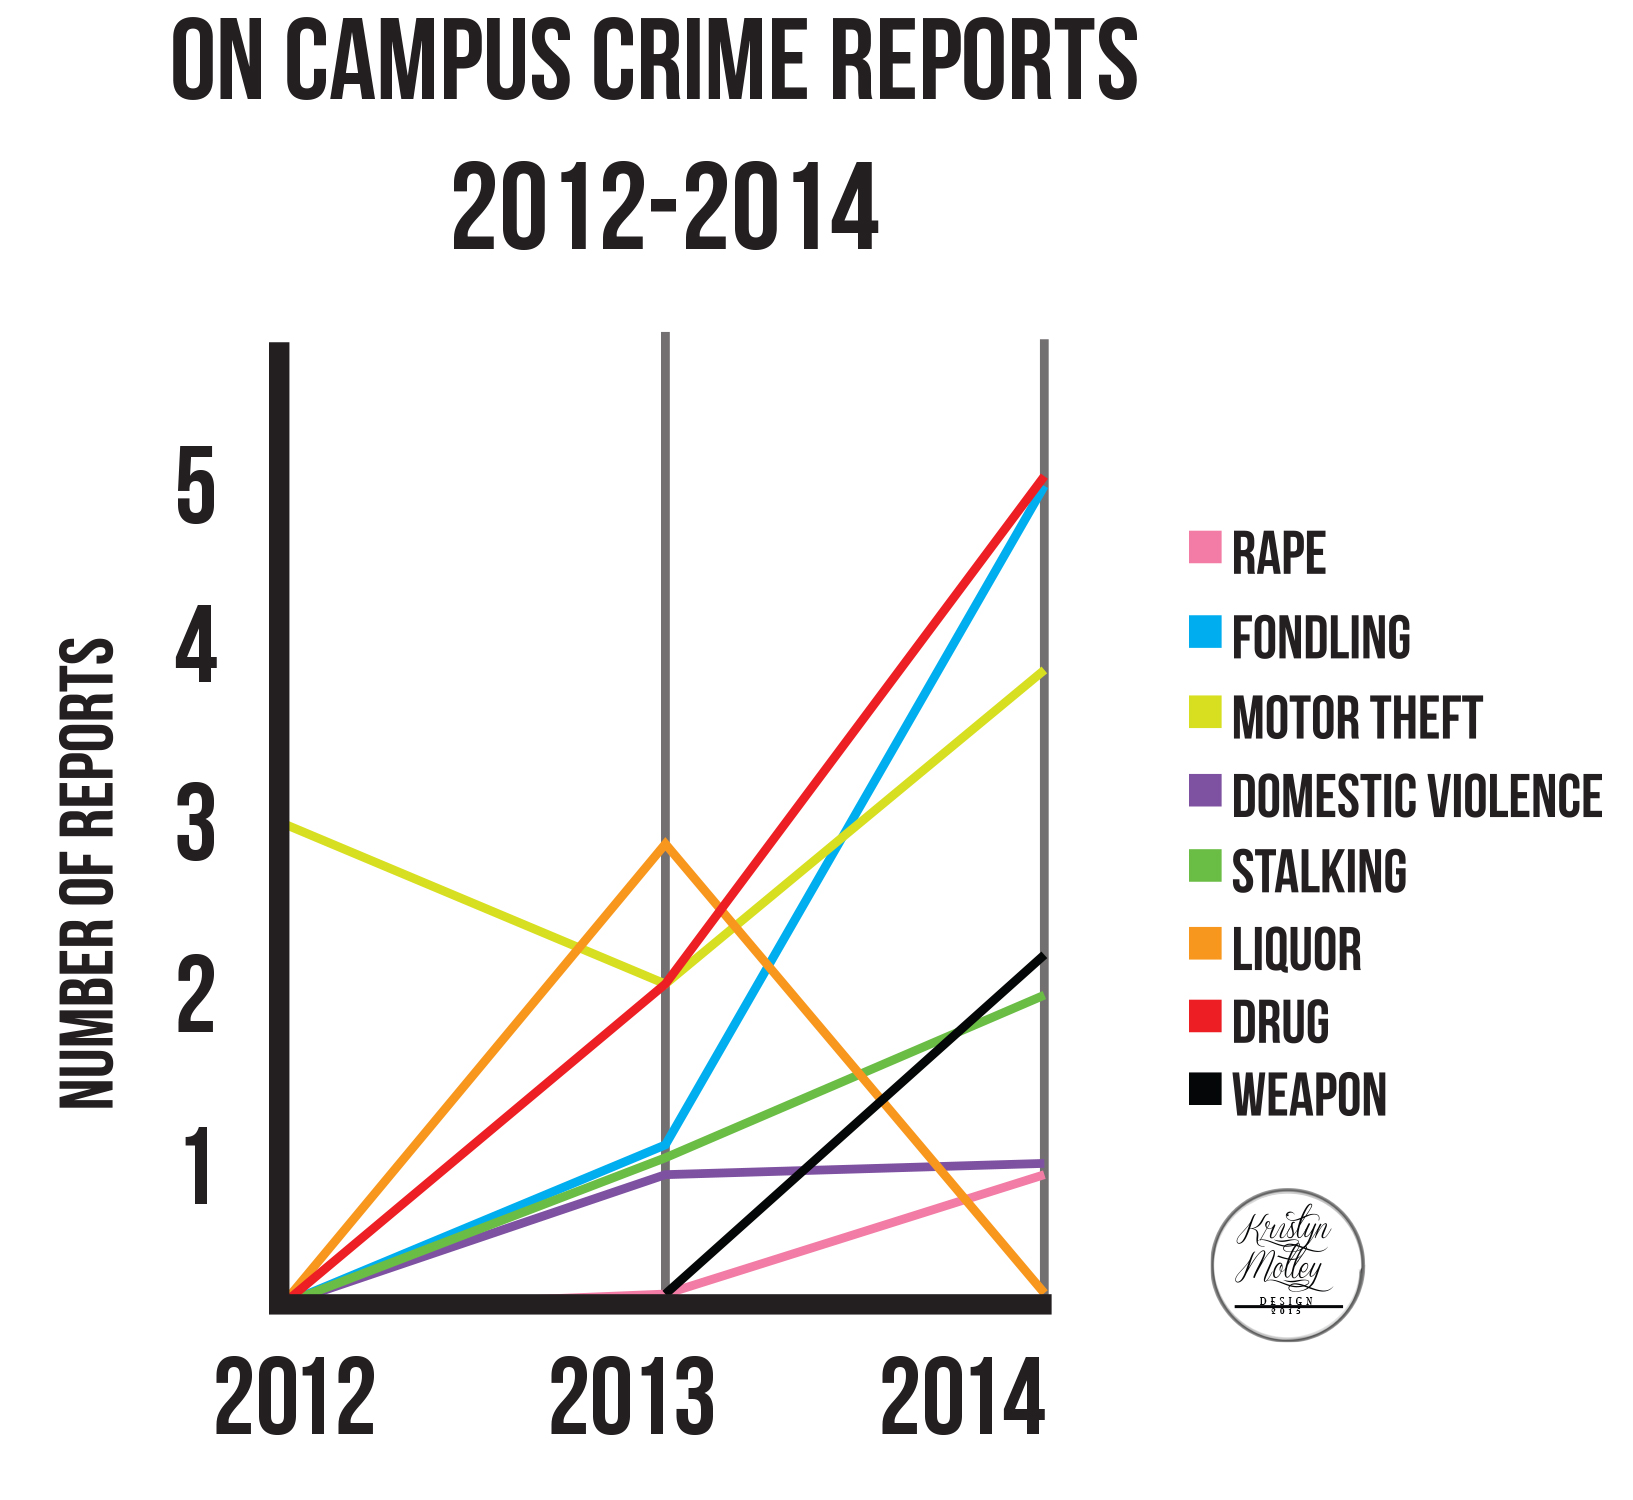 On campus crime reports 2012 - 2014